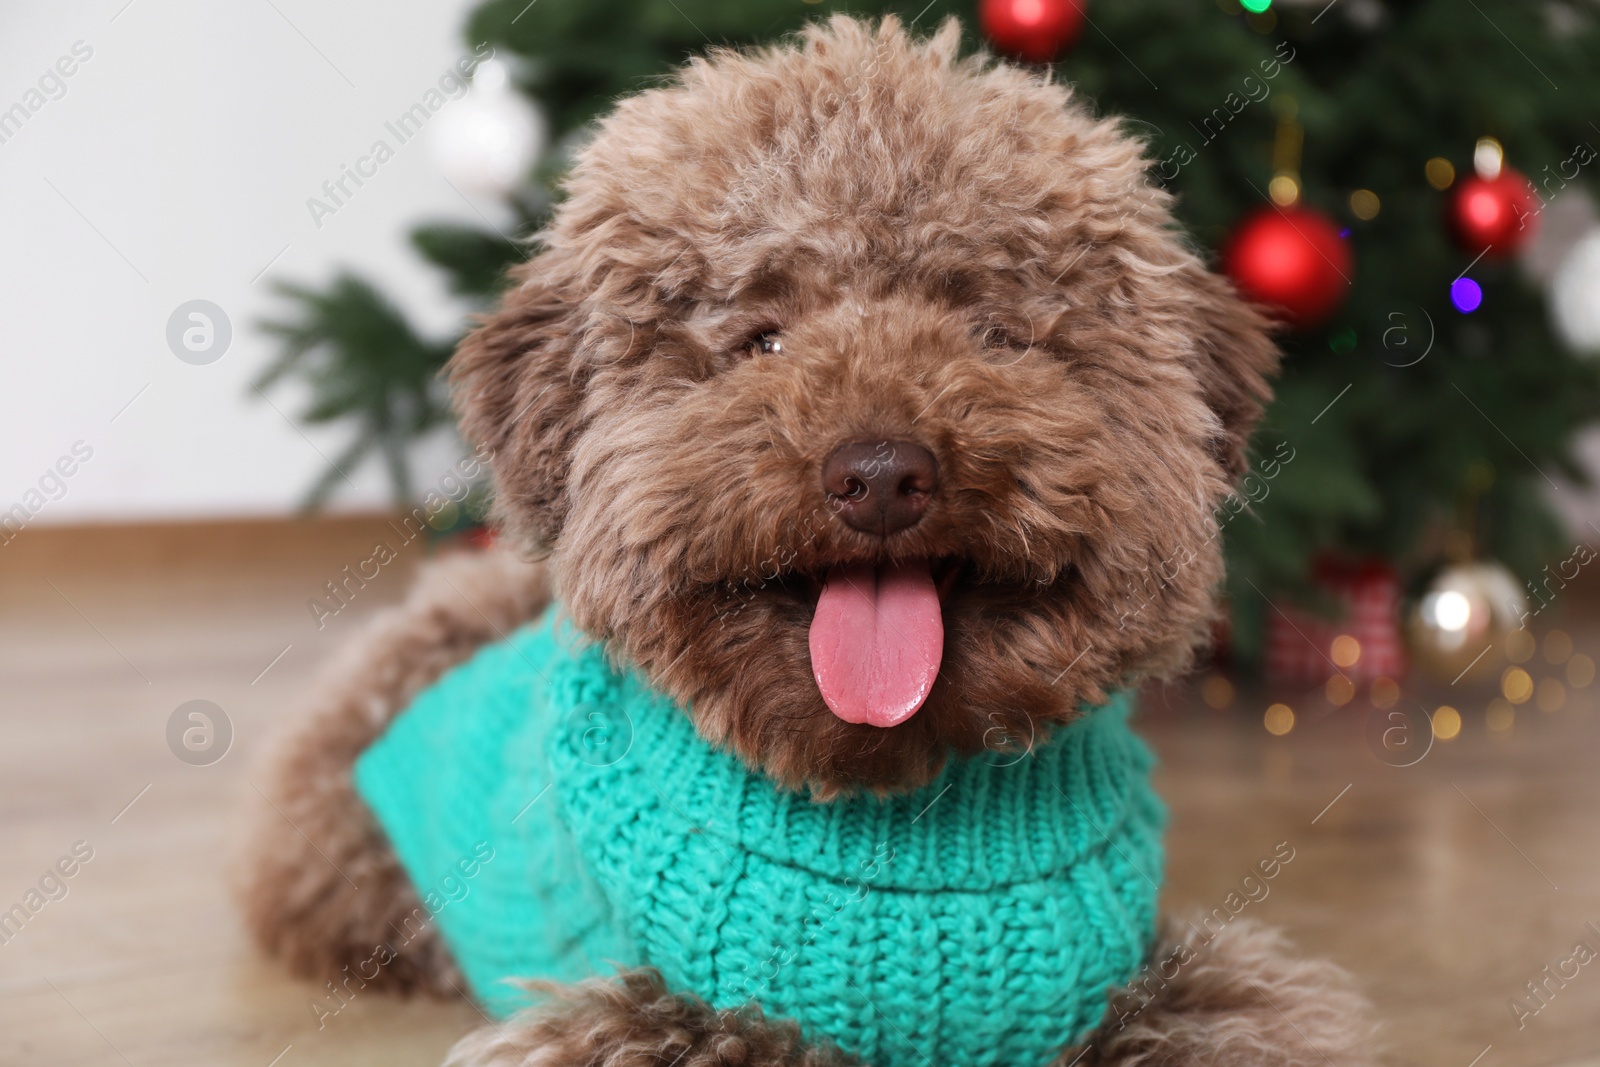 Photo of Cute Toy Poodle dog in knitted sweater and Christmas tree indoors, closeup